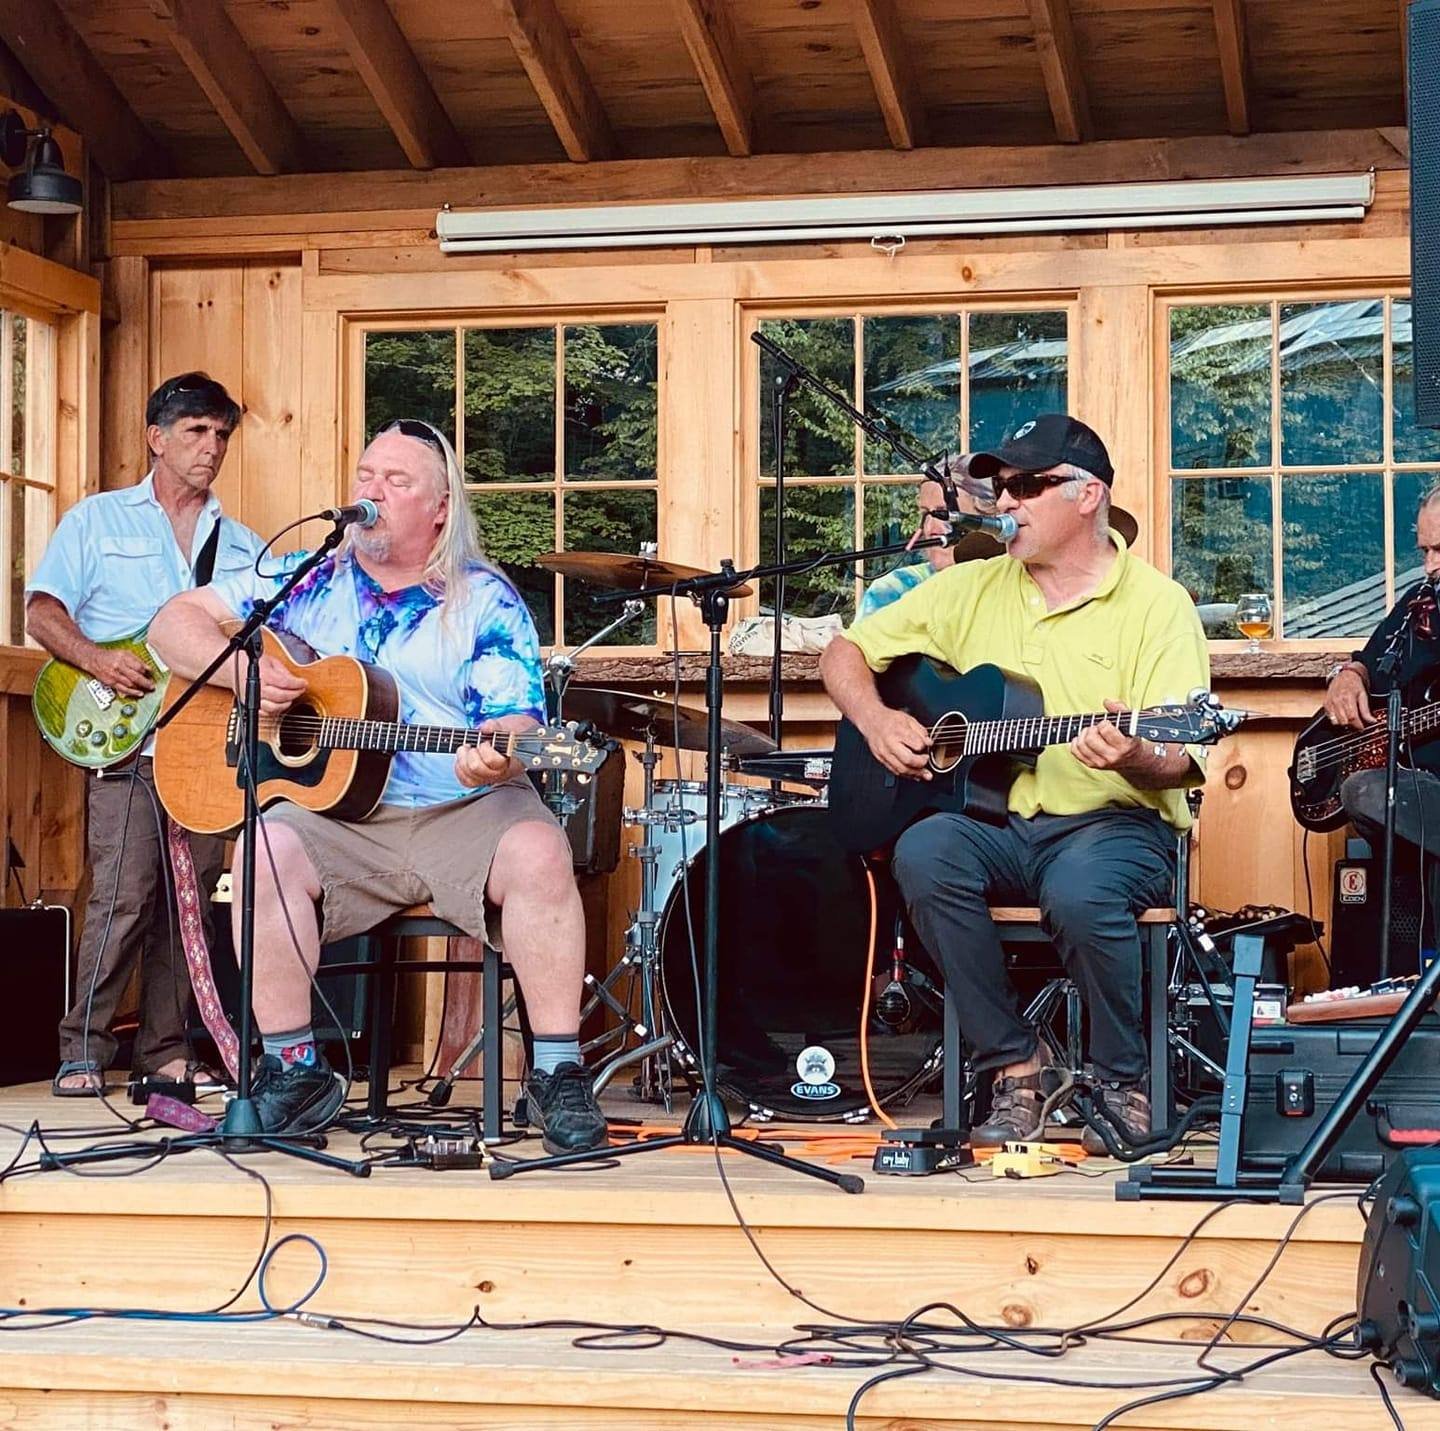 🎉🎶 Just over a week away! Are you ready for Friday Family Nights at The Whale? Our Music in May Party with The Gully Boys on 5/17 is gearing up to be the highlight of your spring! Delicious food, refreshing drinks, and endless fun await. Don&rsquo;